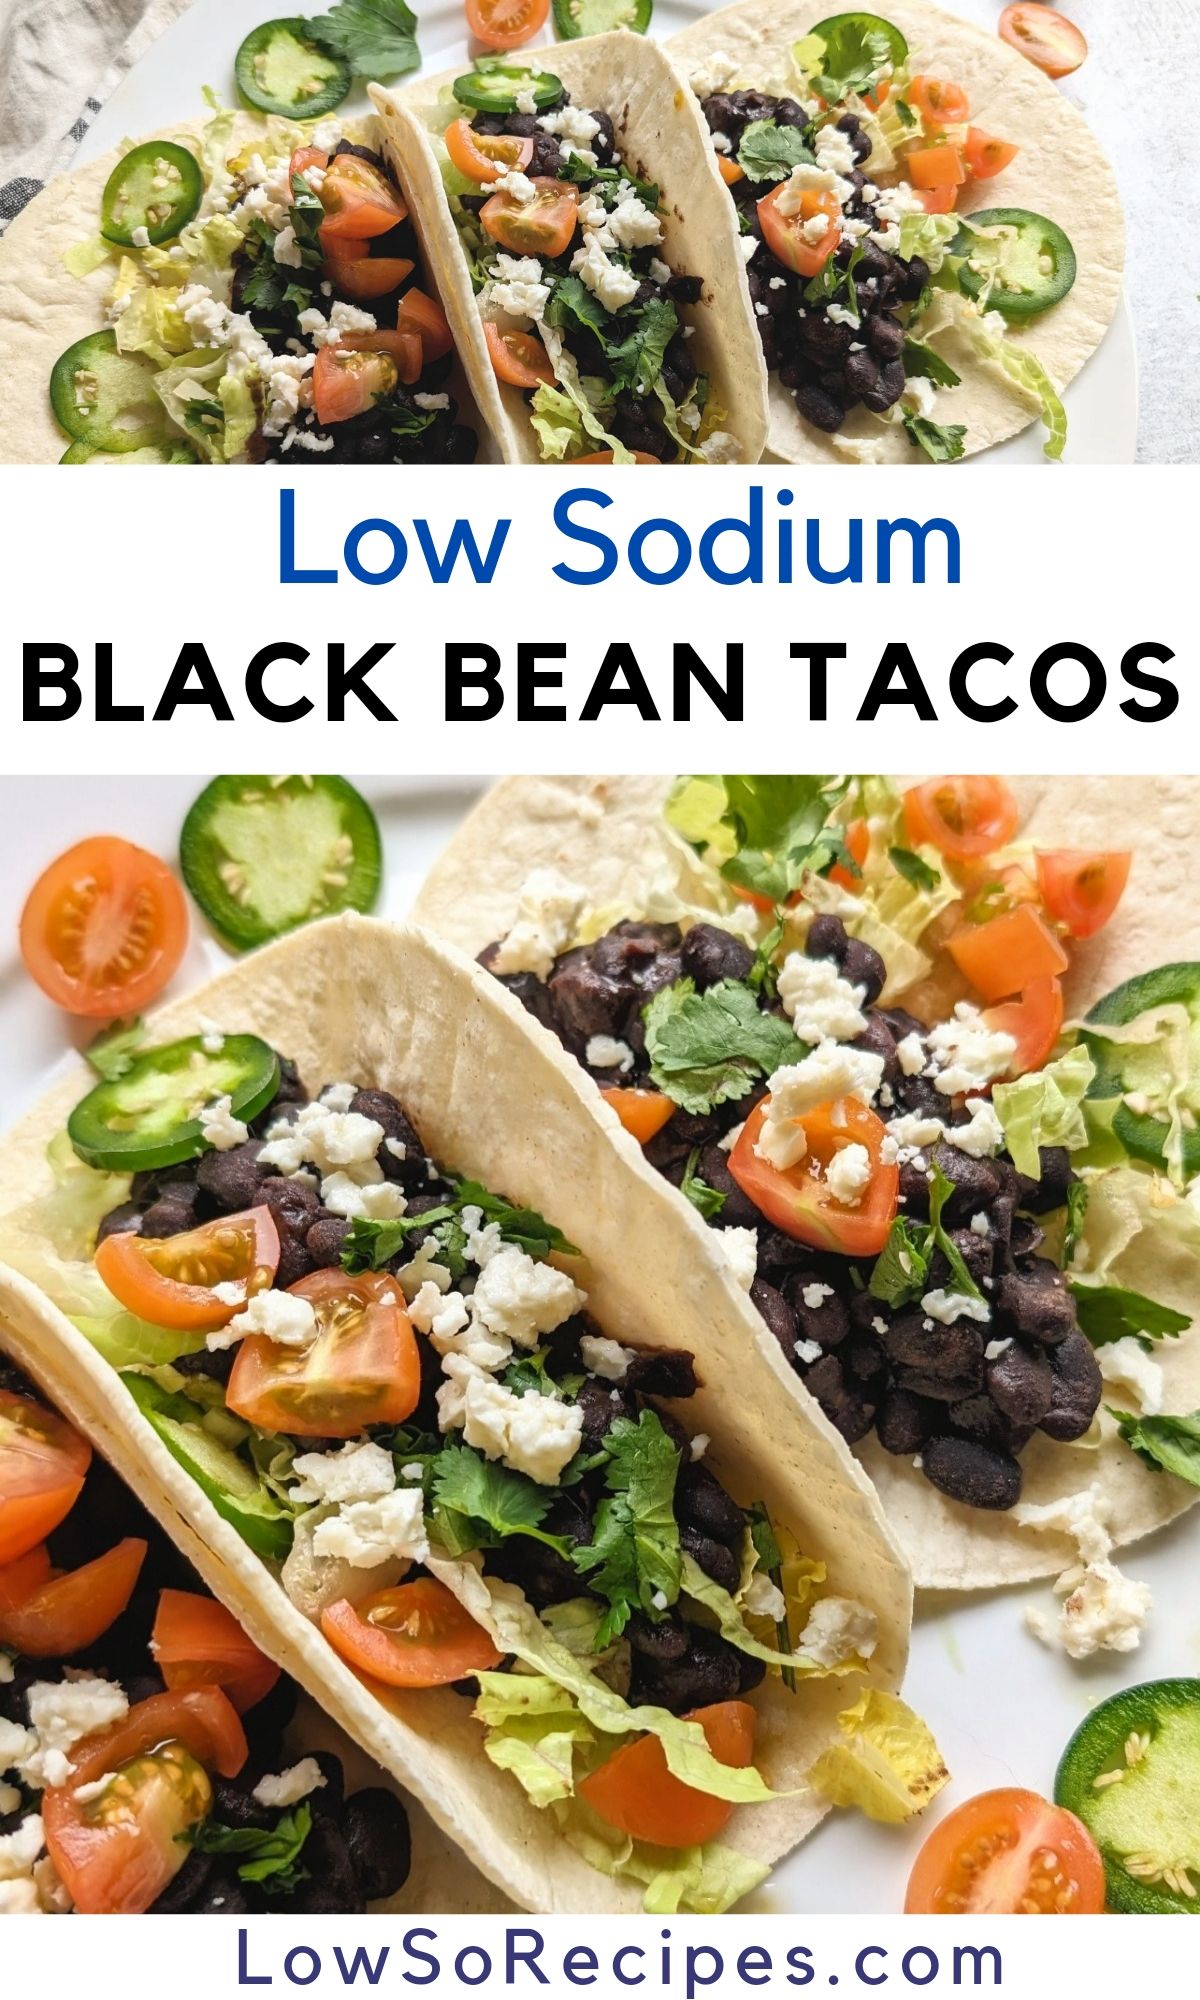 low sodium black bean tacos with vegetables and no salt added spicy black beans with corn tortillas